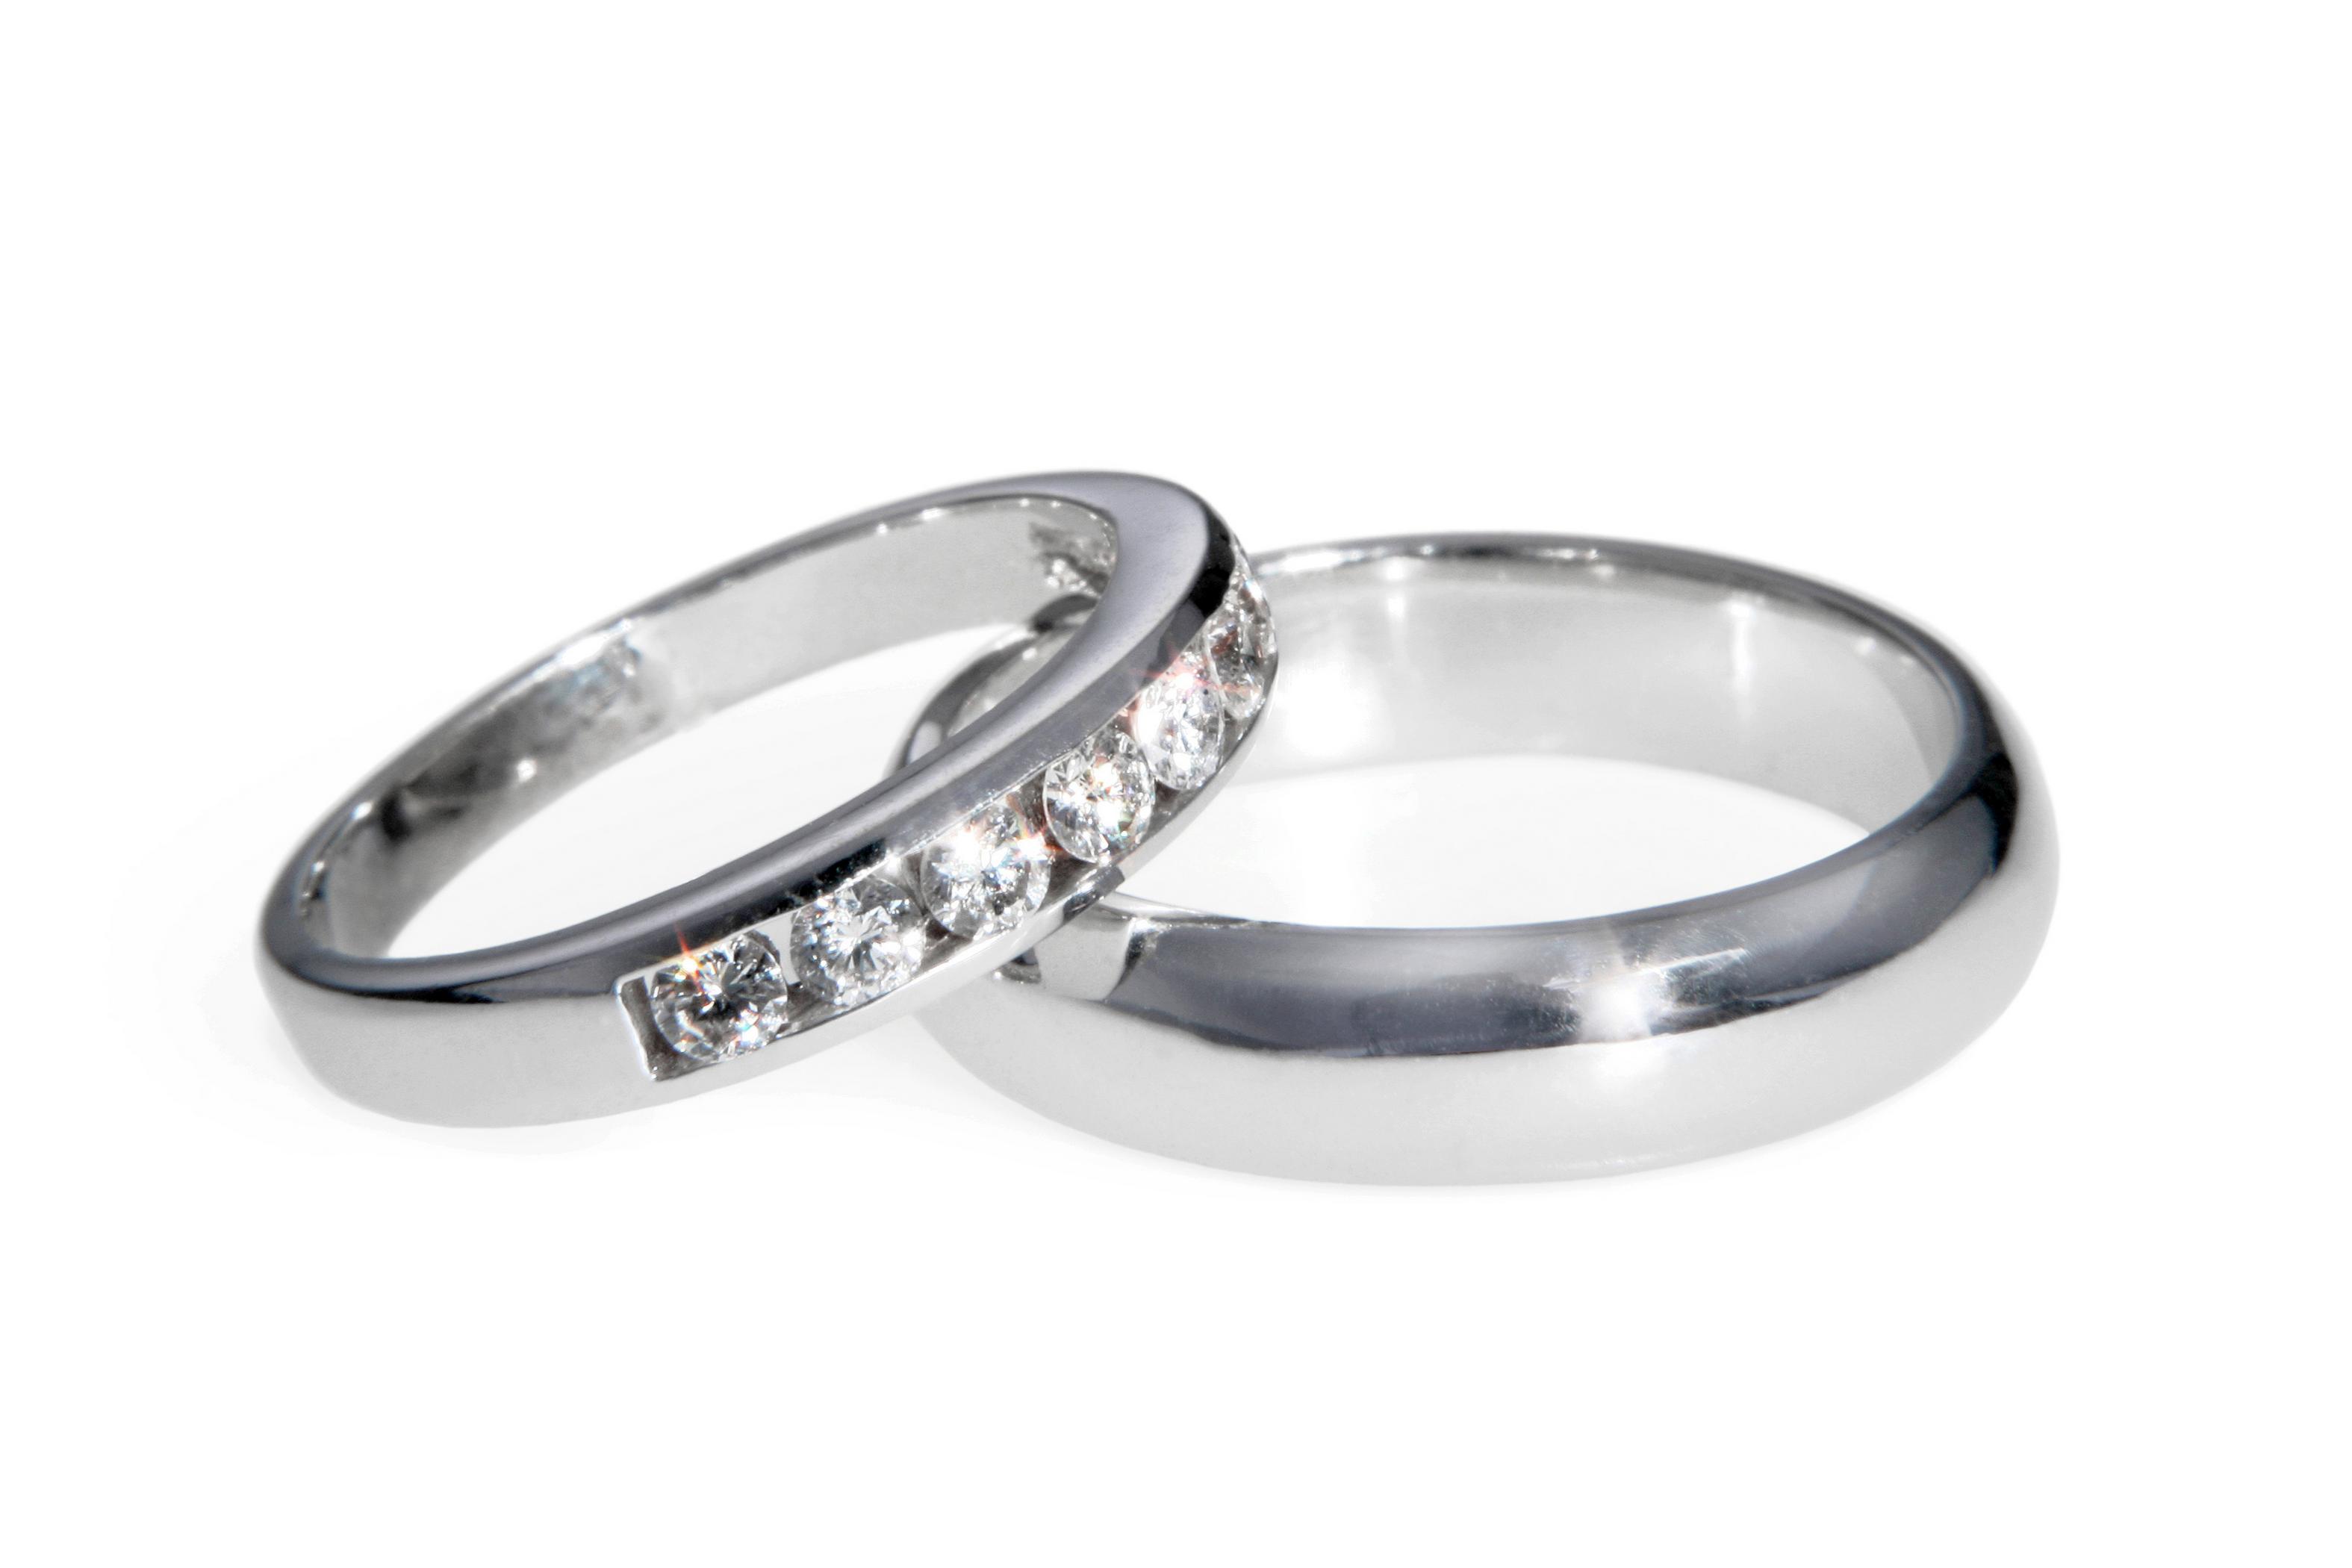 Pros and Cons of Stainless Steel Wedding Bands